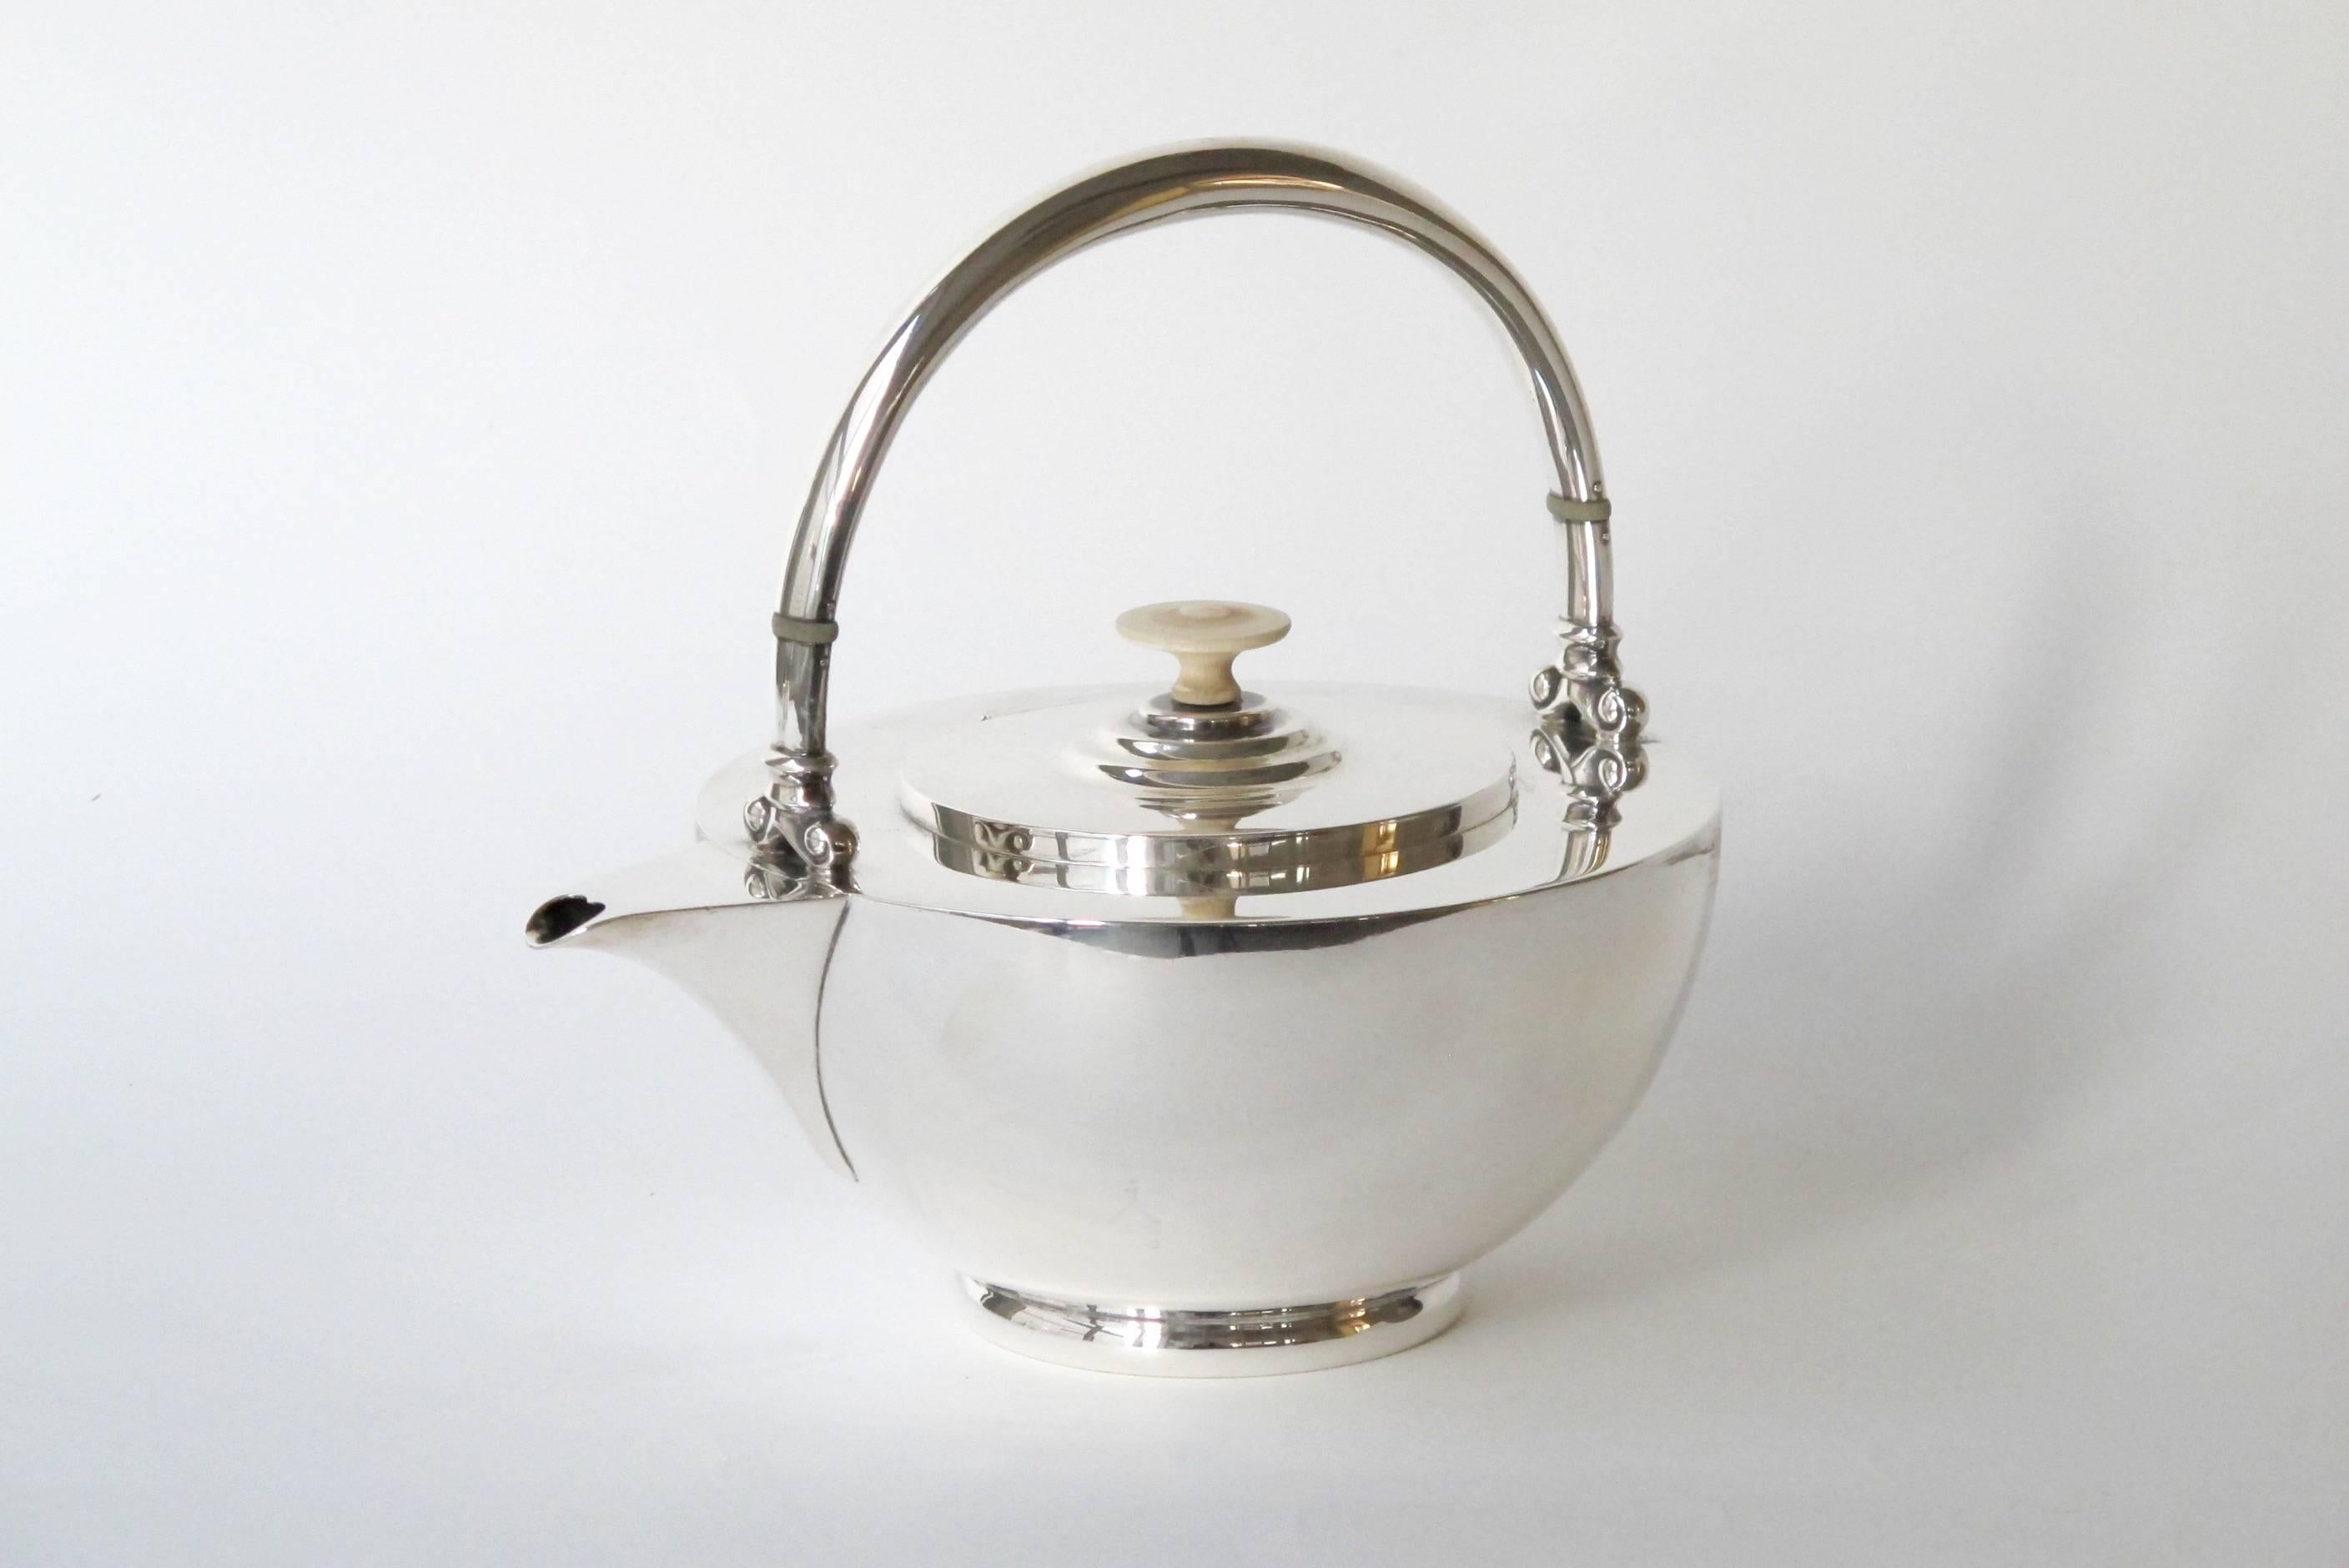 This beautiful four-piece sterling silver teaset is made by the German manufacturer Koch & Bergfeld in Bremen for Roelof Citroen, an established retailer of silverware in Amsterdam. Koch & Bergfeld is one of the world's oldest producers of